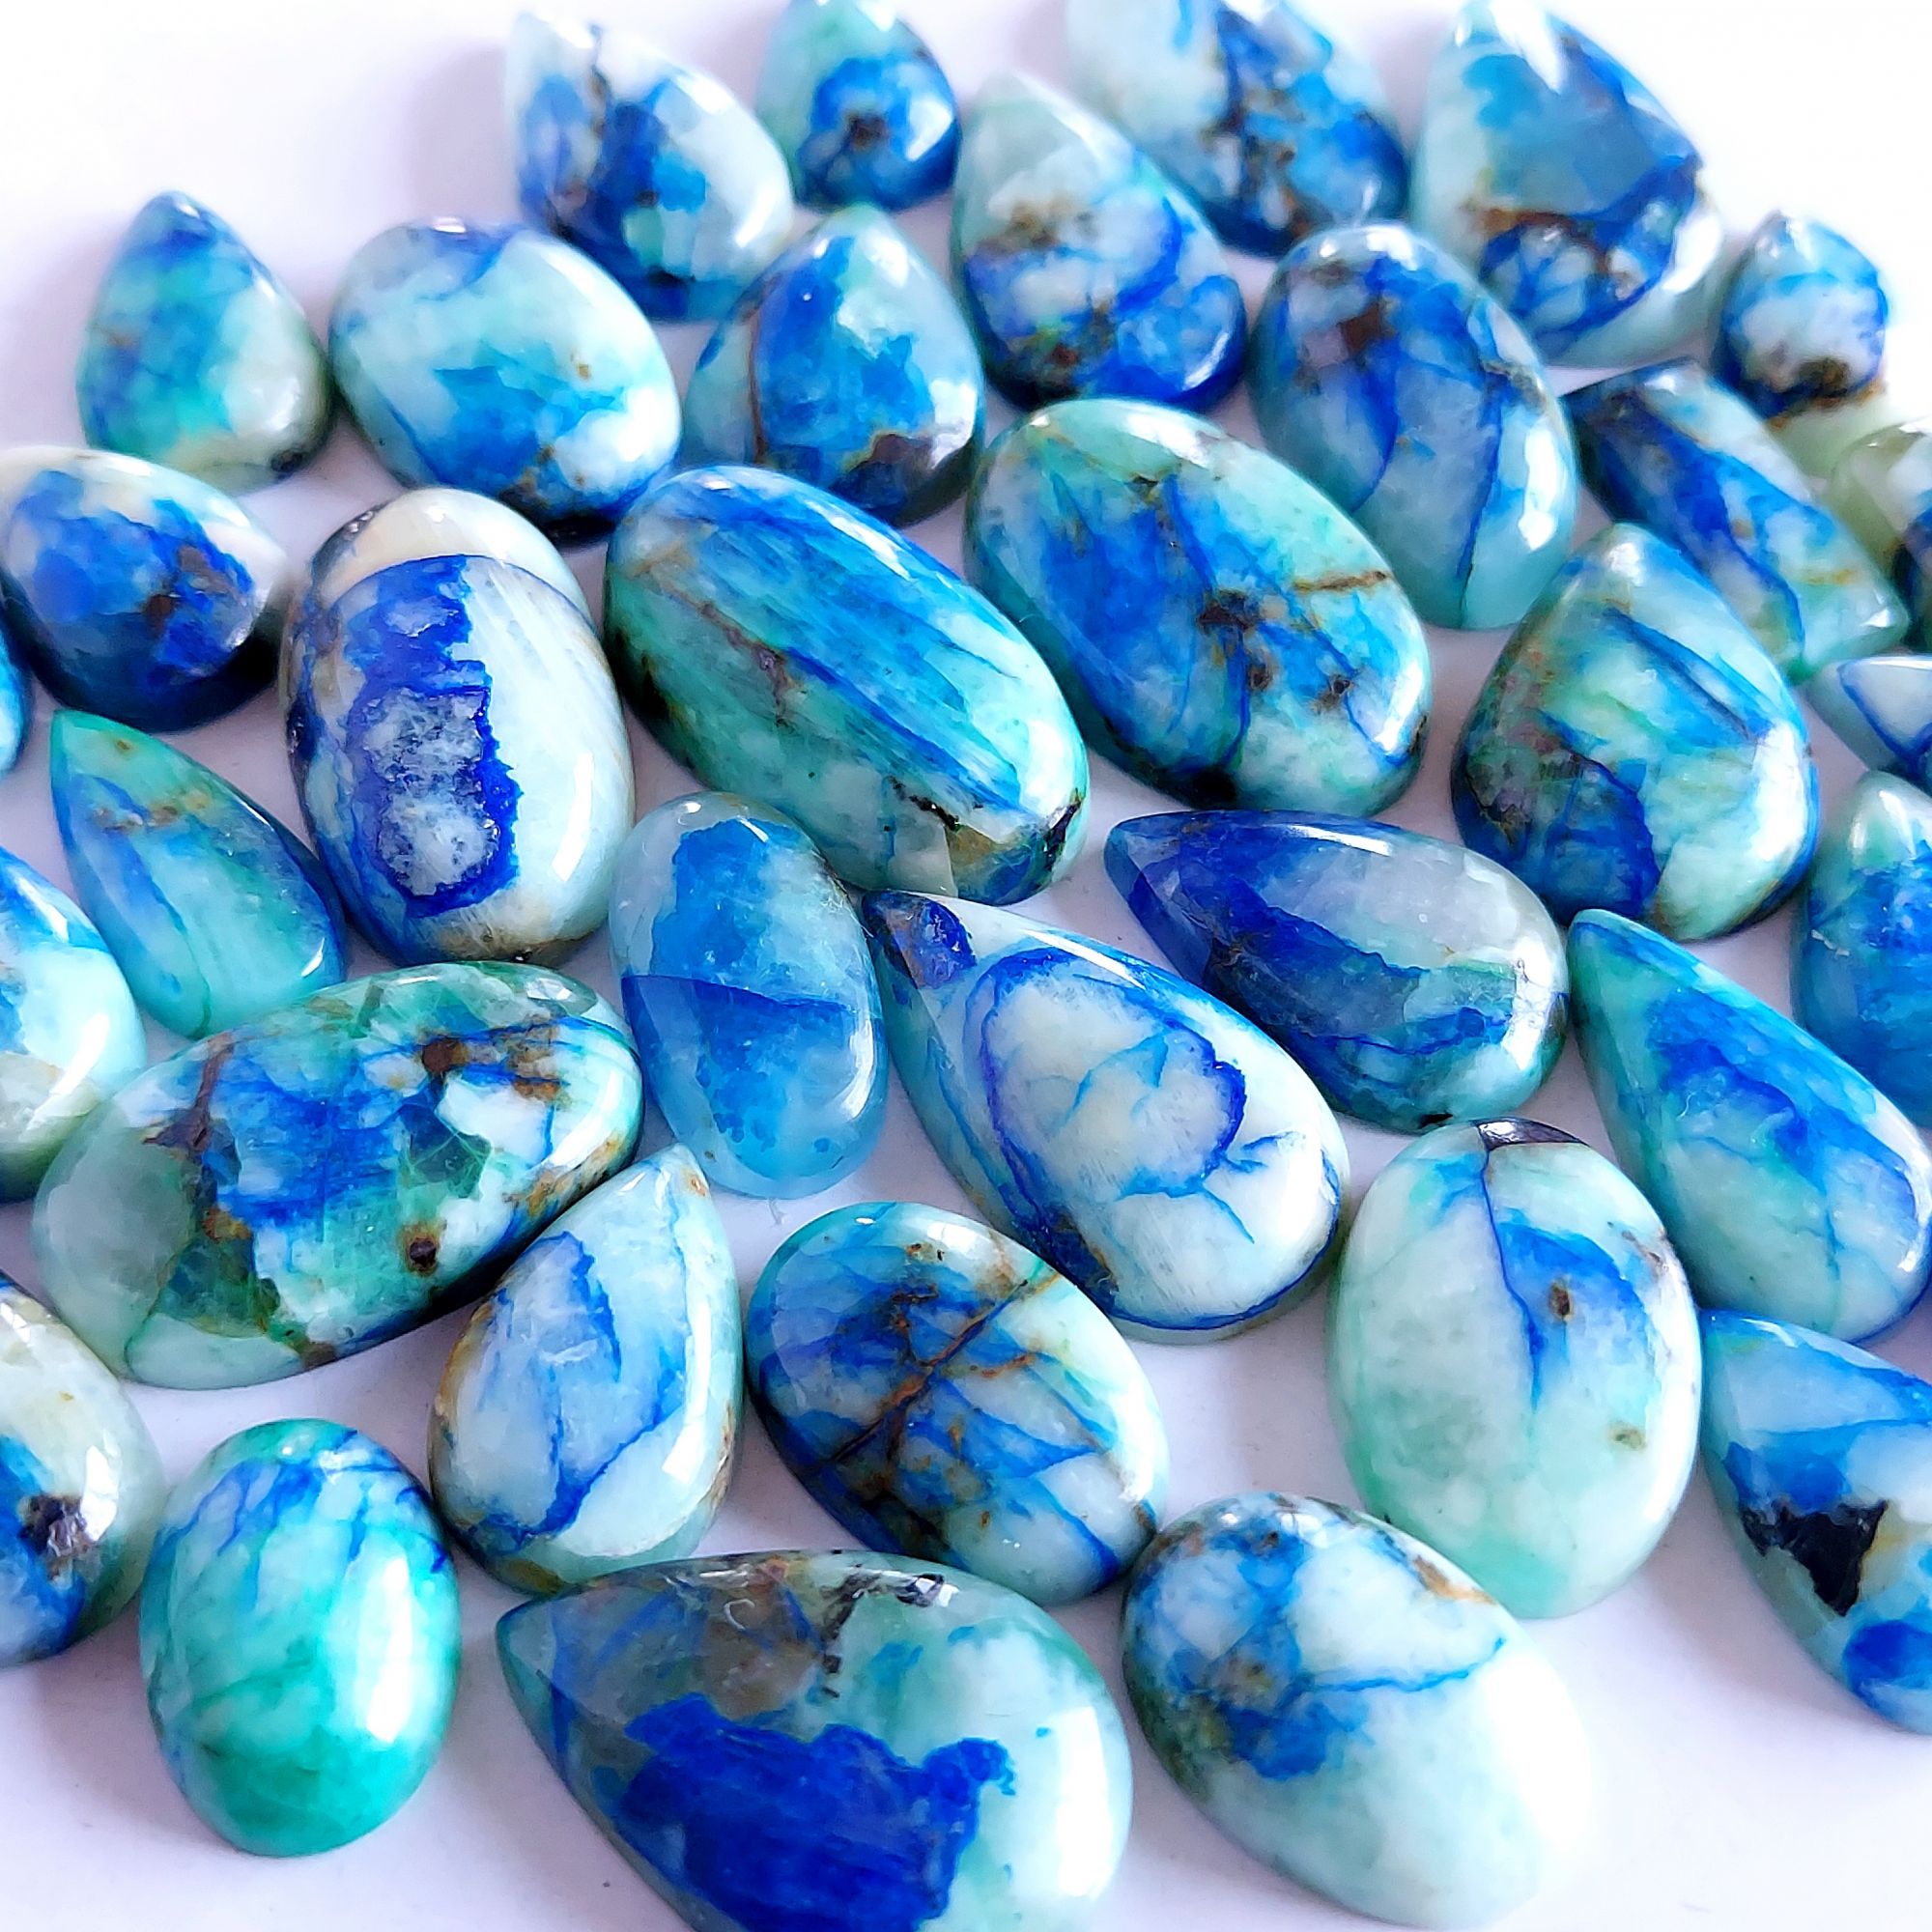 398.Cts 36 Pcs Natural Smooth Azurite Mix Loose Gemstone Cabochon Lot Size 25x14 17x10mm Wholesale Gemstone For jewelry